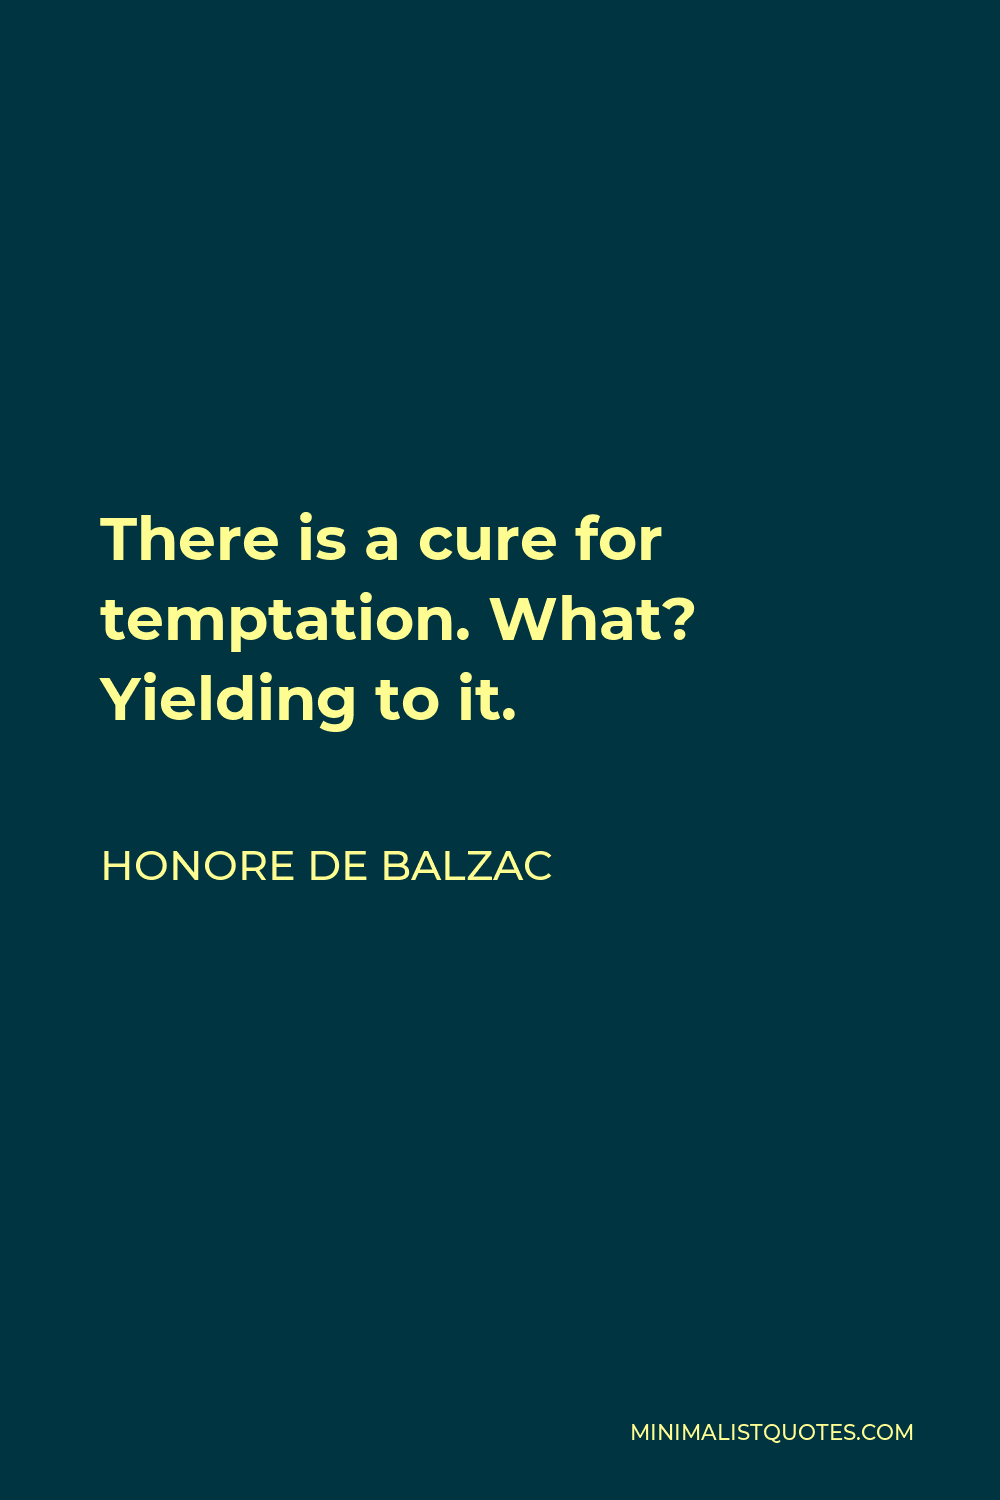 Honore de Balzac Quote - There is a cure for temptation. What? Yielding to it.